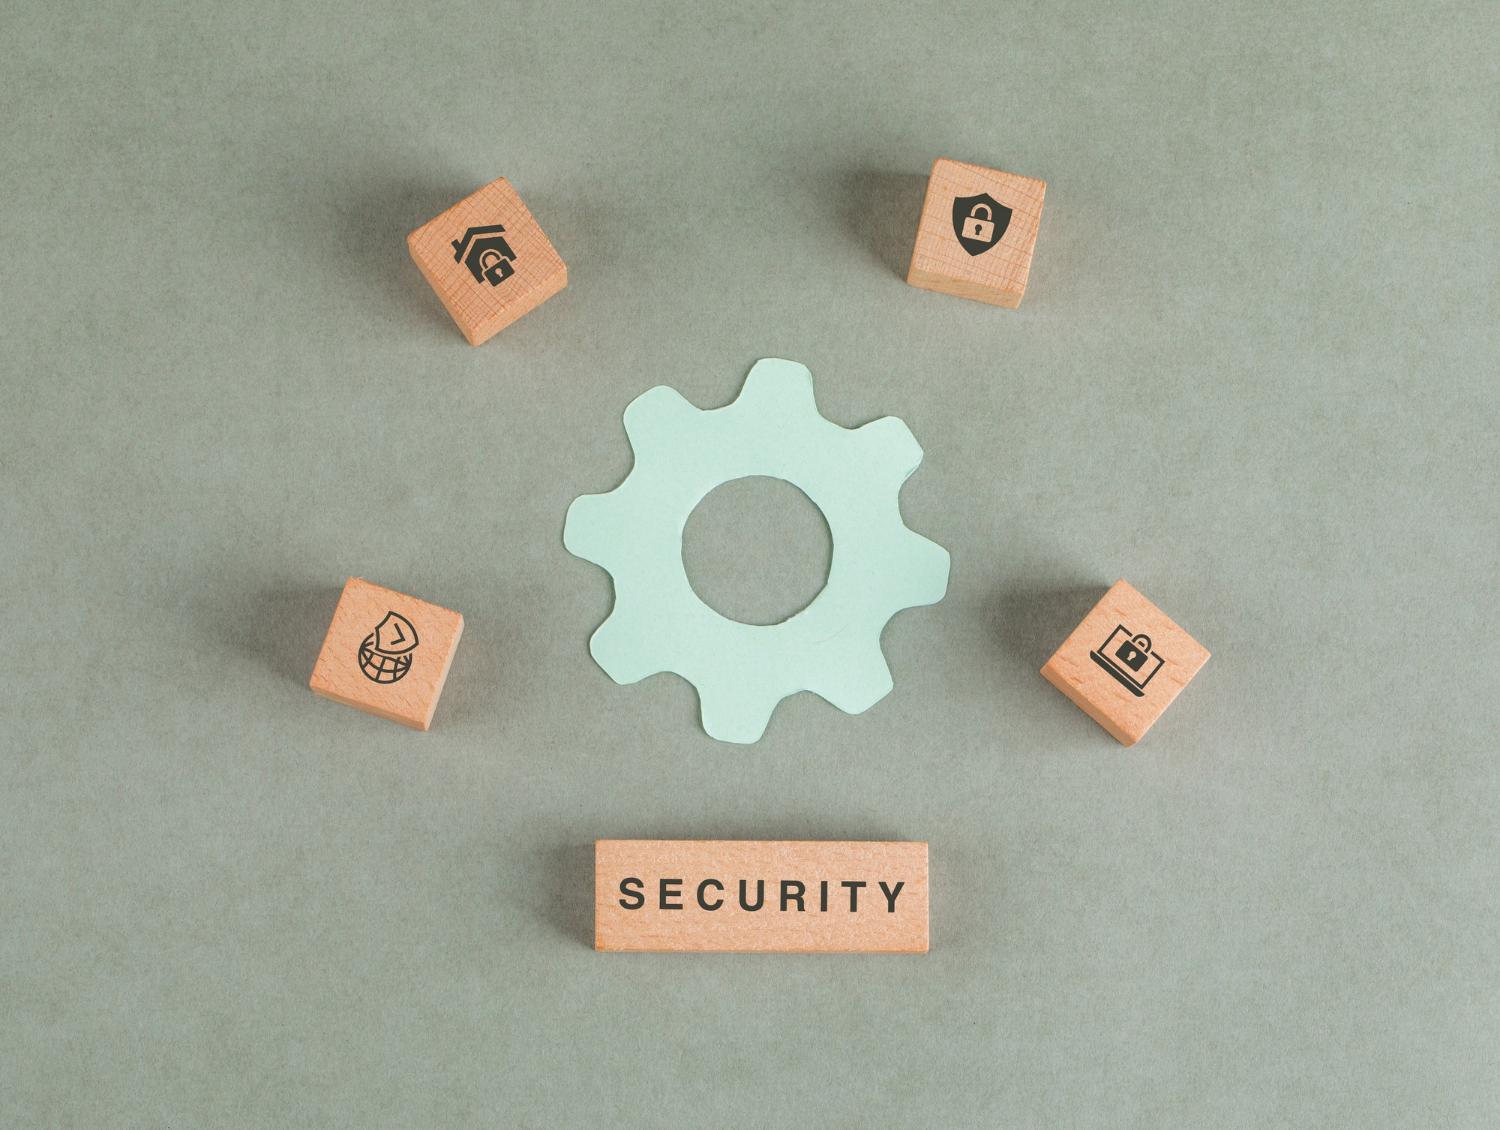 Security and Governance